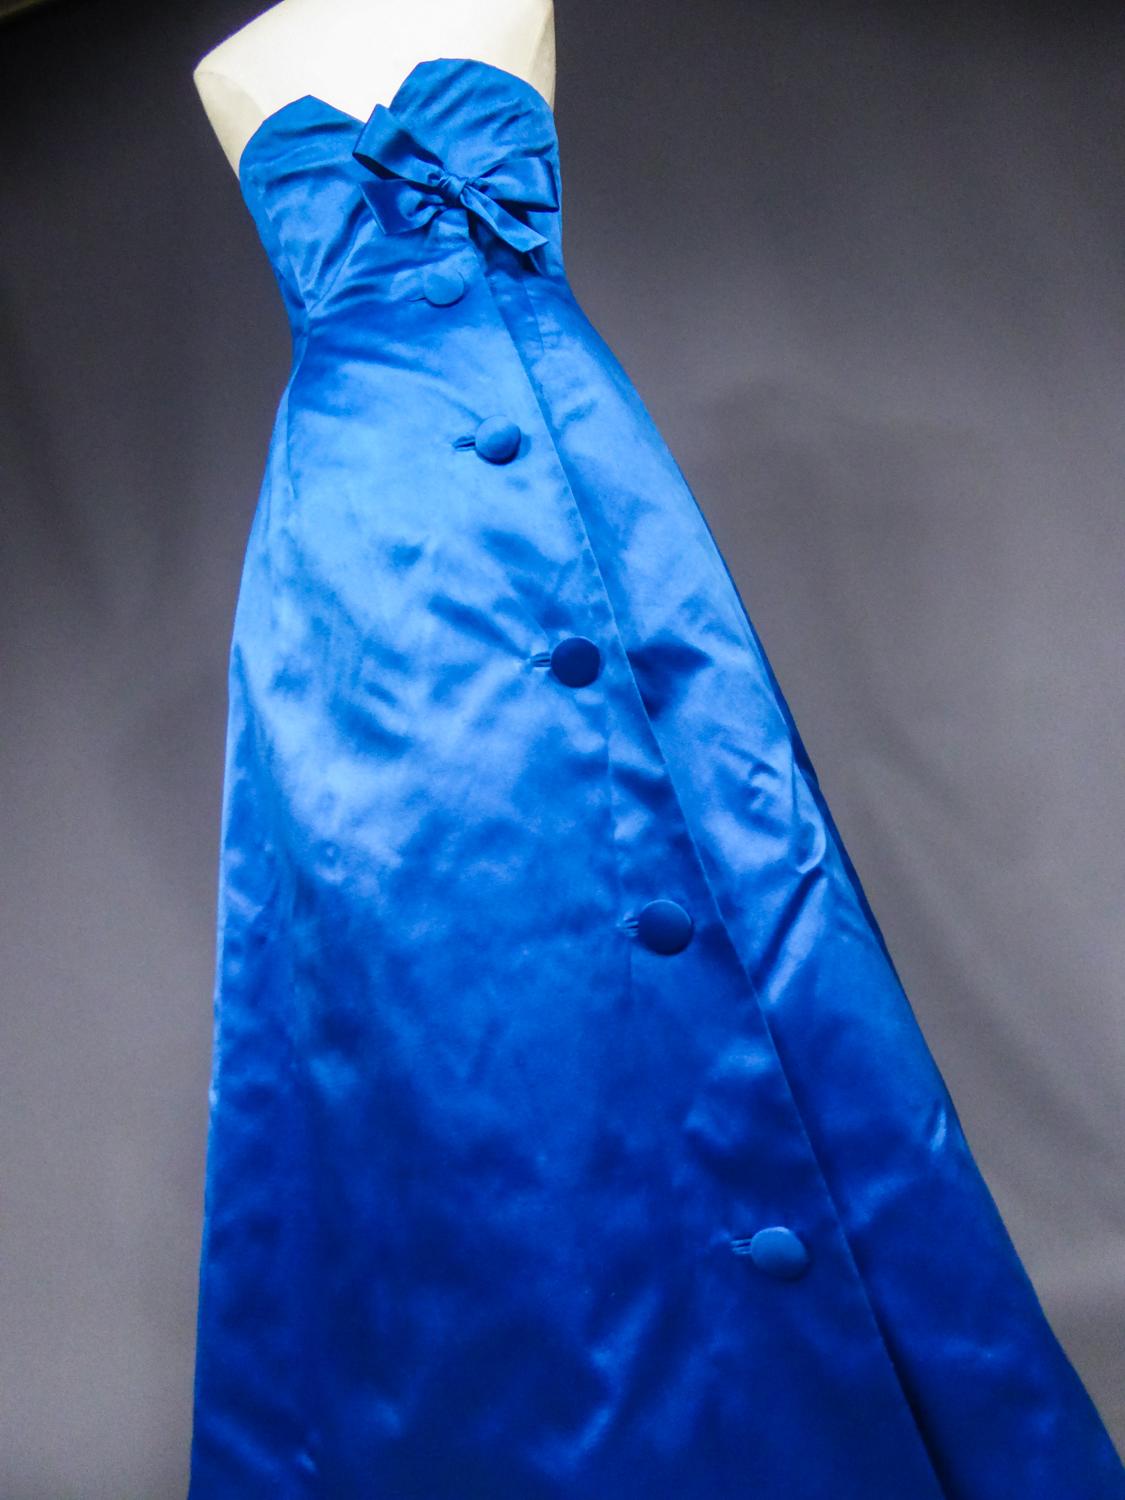 Circa 1959/1962

France

Beautiful evening dress in electric blue satin from the Jean Patou House directed by Karl Lagerfeld between 1959 and 1962. Long dress in sheath hugging the hips, treated assymetrically in the back with matching buttoning,